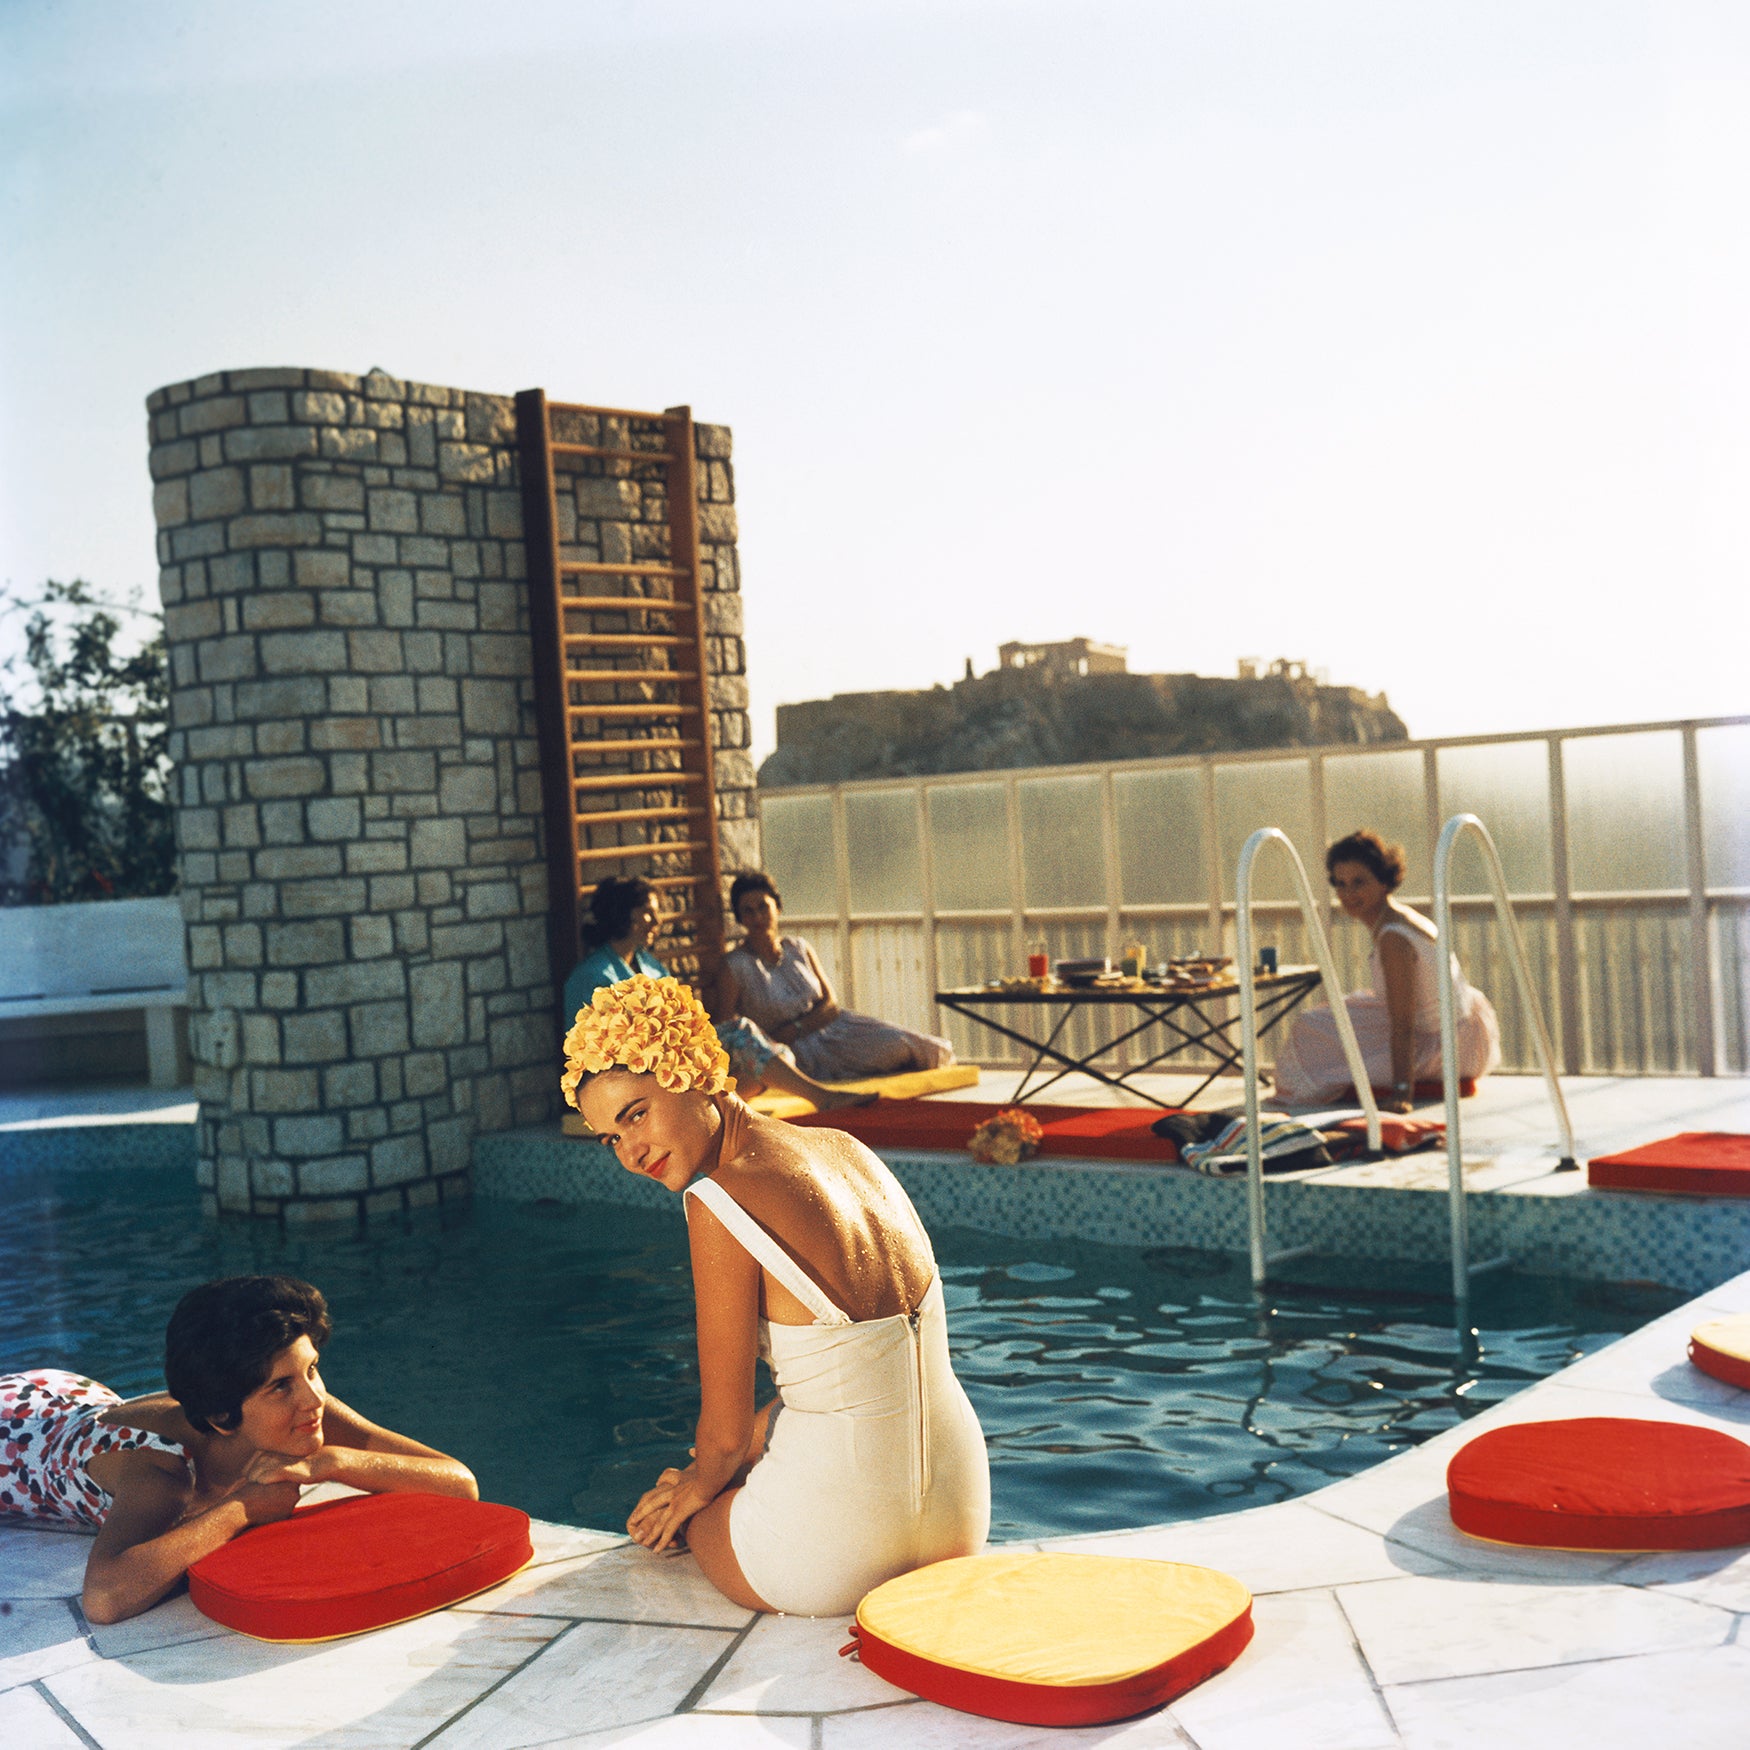 Slim Aarons: Penthouse Pool photo for sale Getty Images Gallery